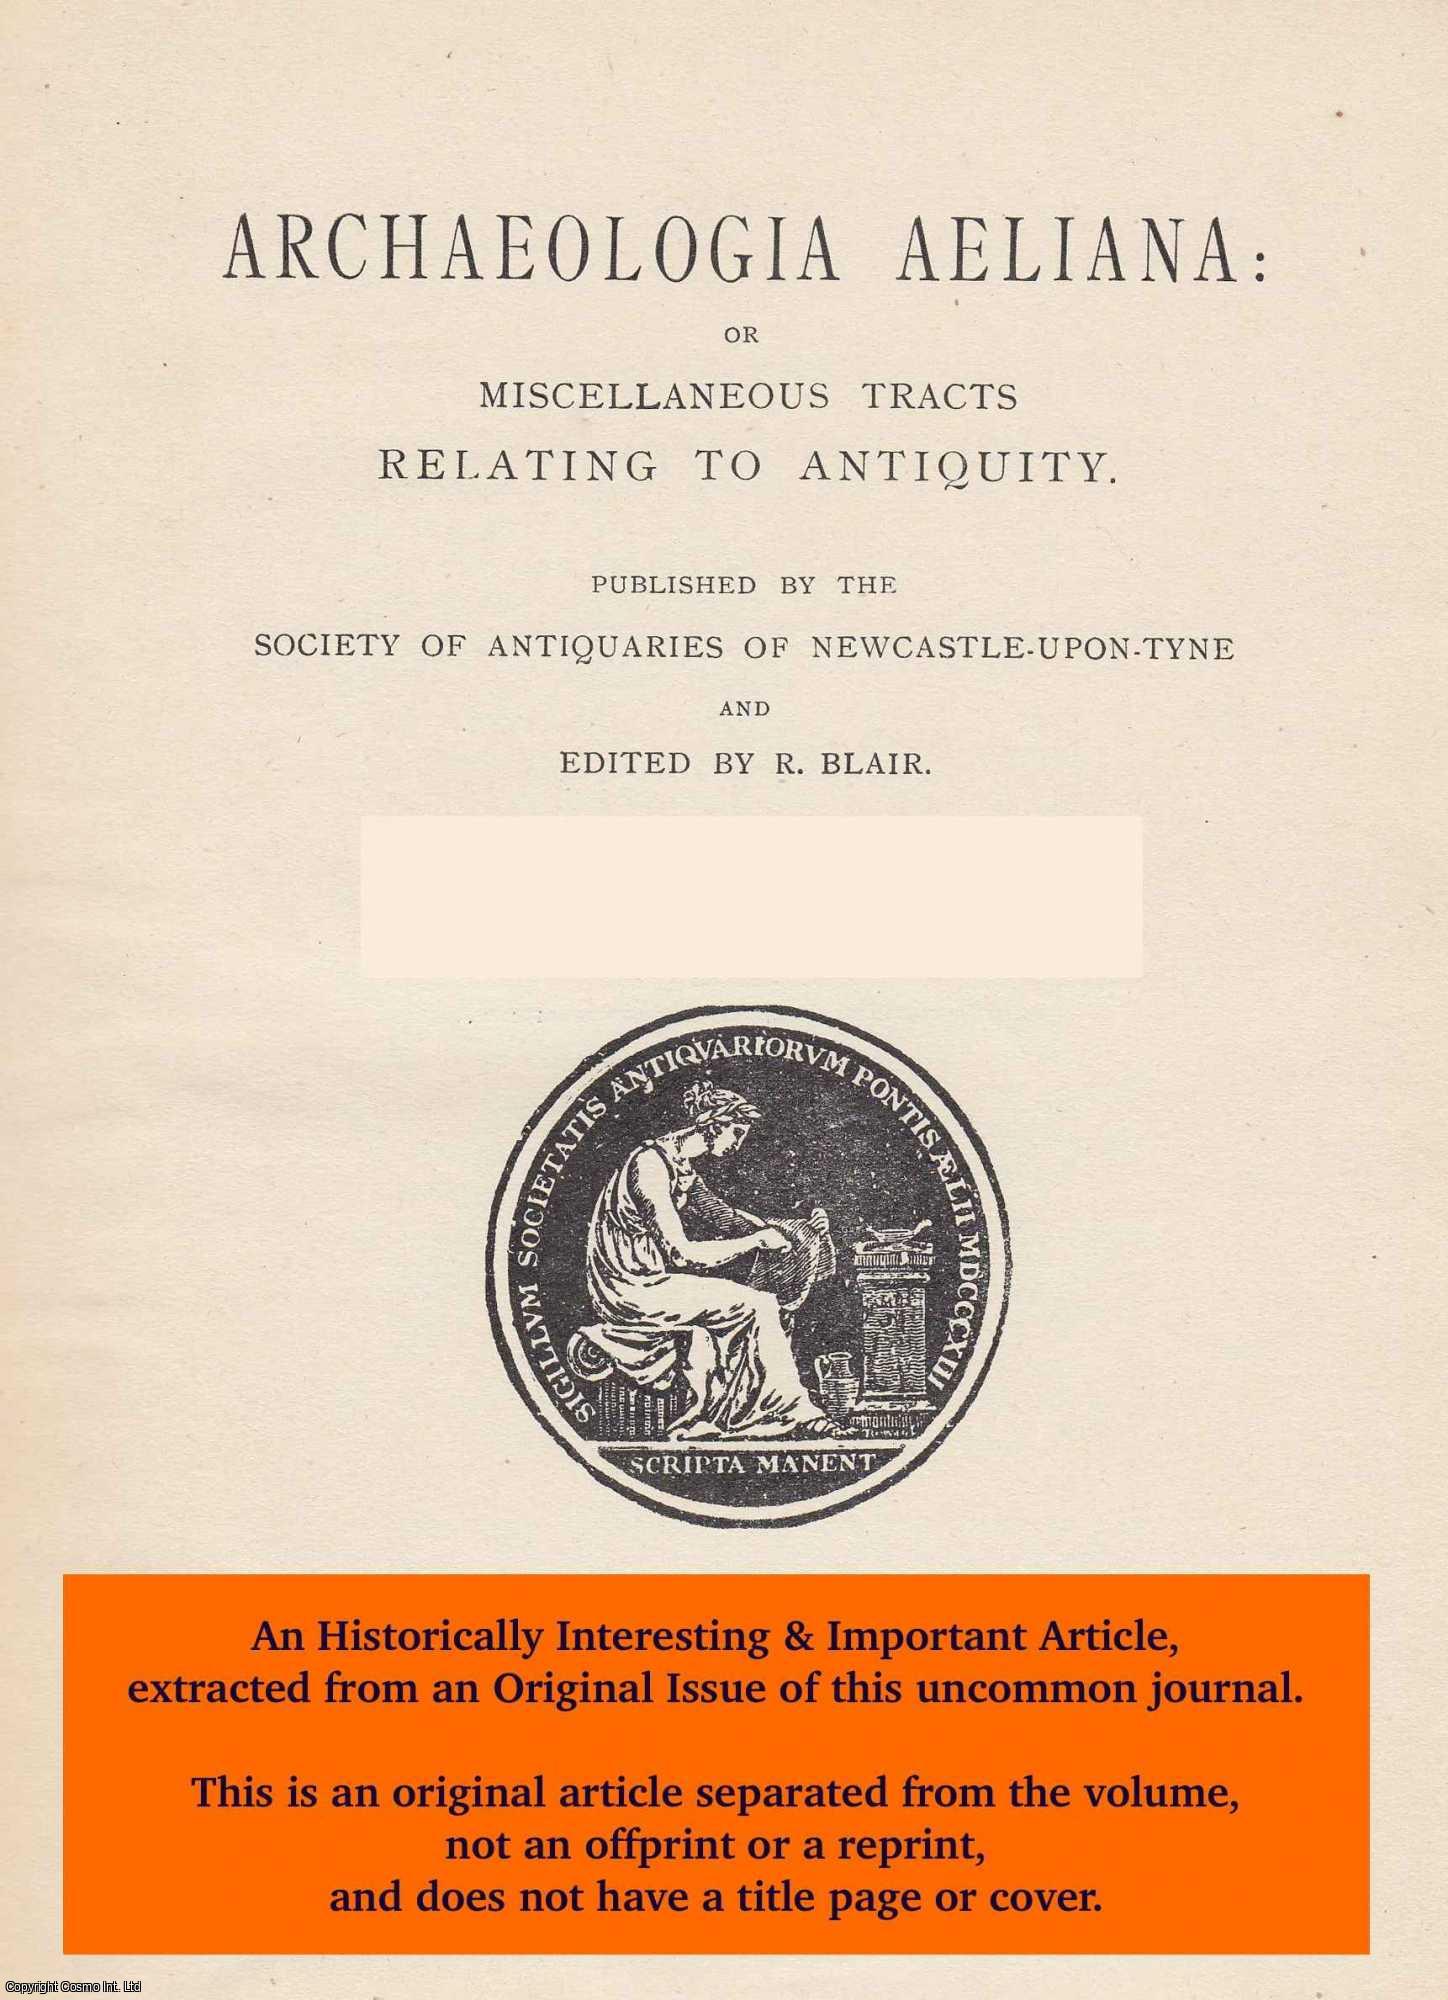 C. Roy Hudleston - Fenwick of Bywell. An original article from The Archaeologia Aeliana: or Miscellaneous Tracts Relating to Antiquity, 1958.